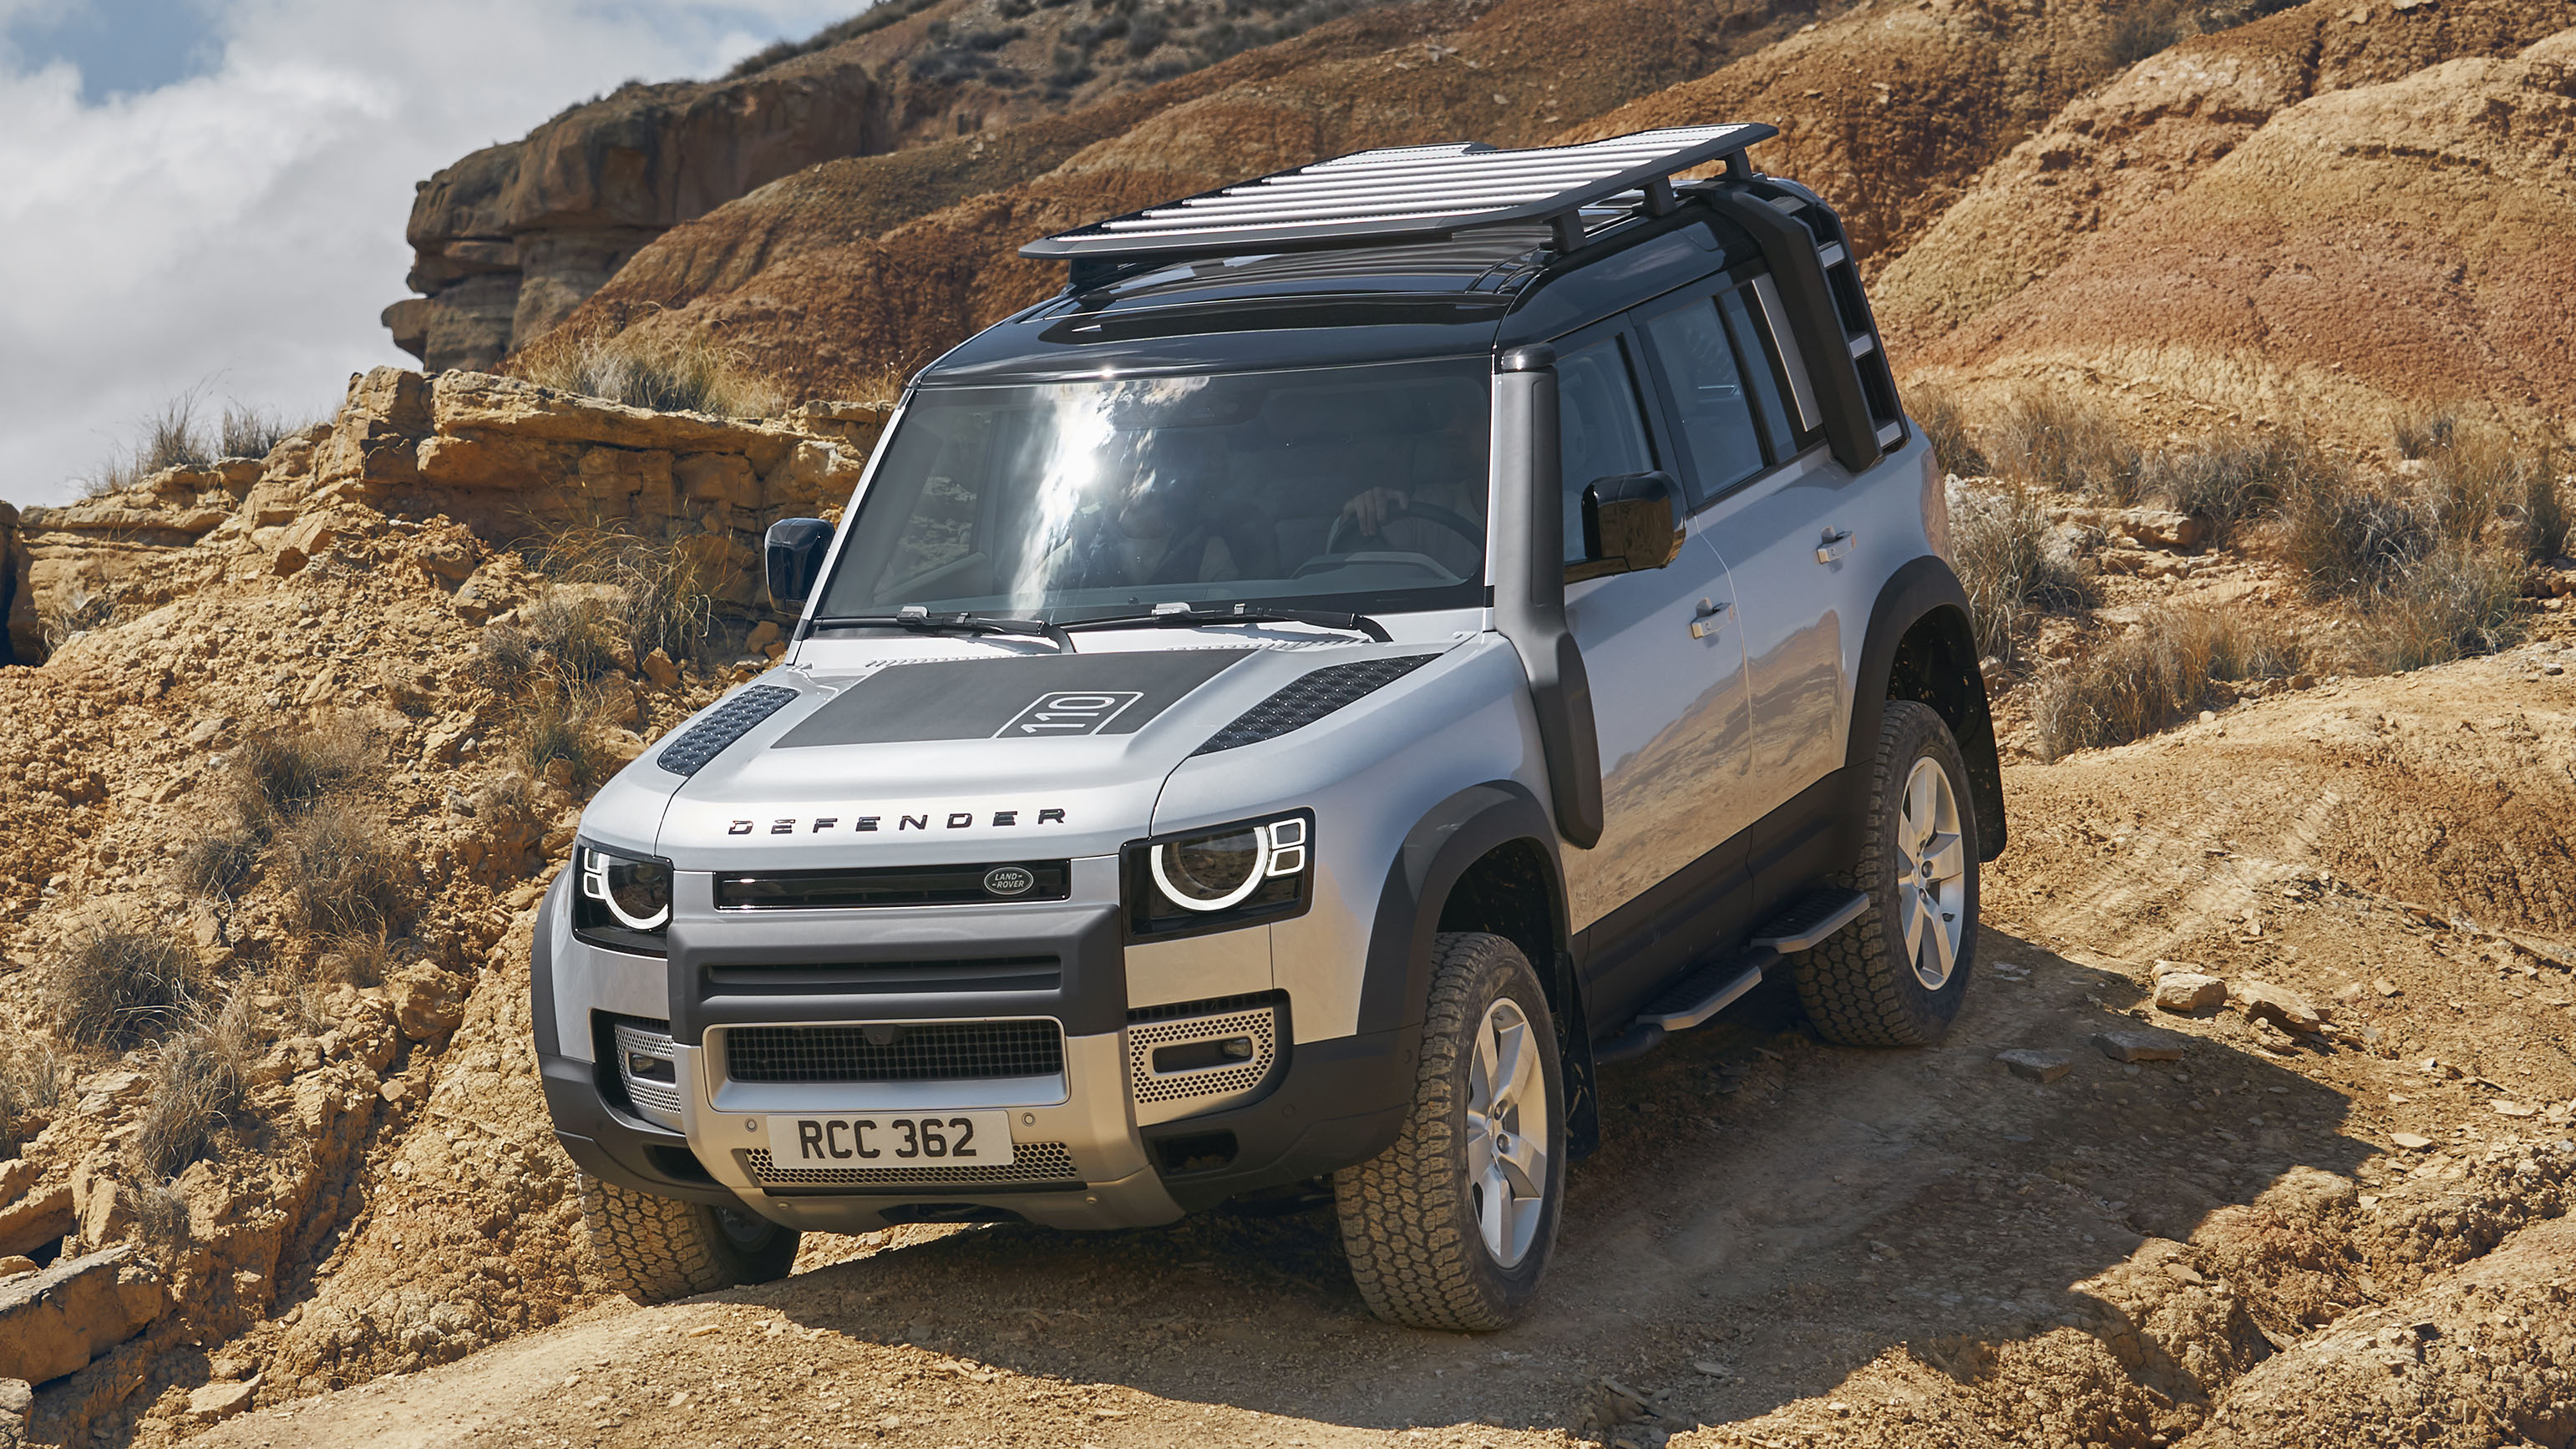 500 New Look Land rover defender 2020 specs for Speed